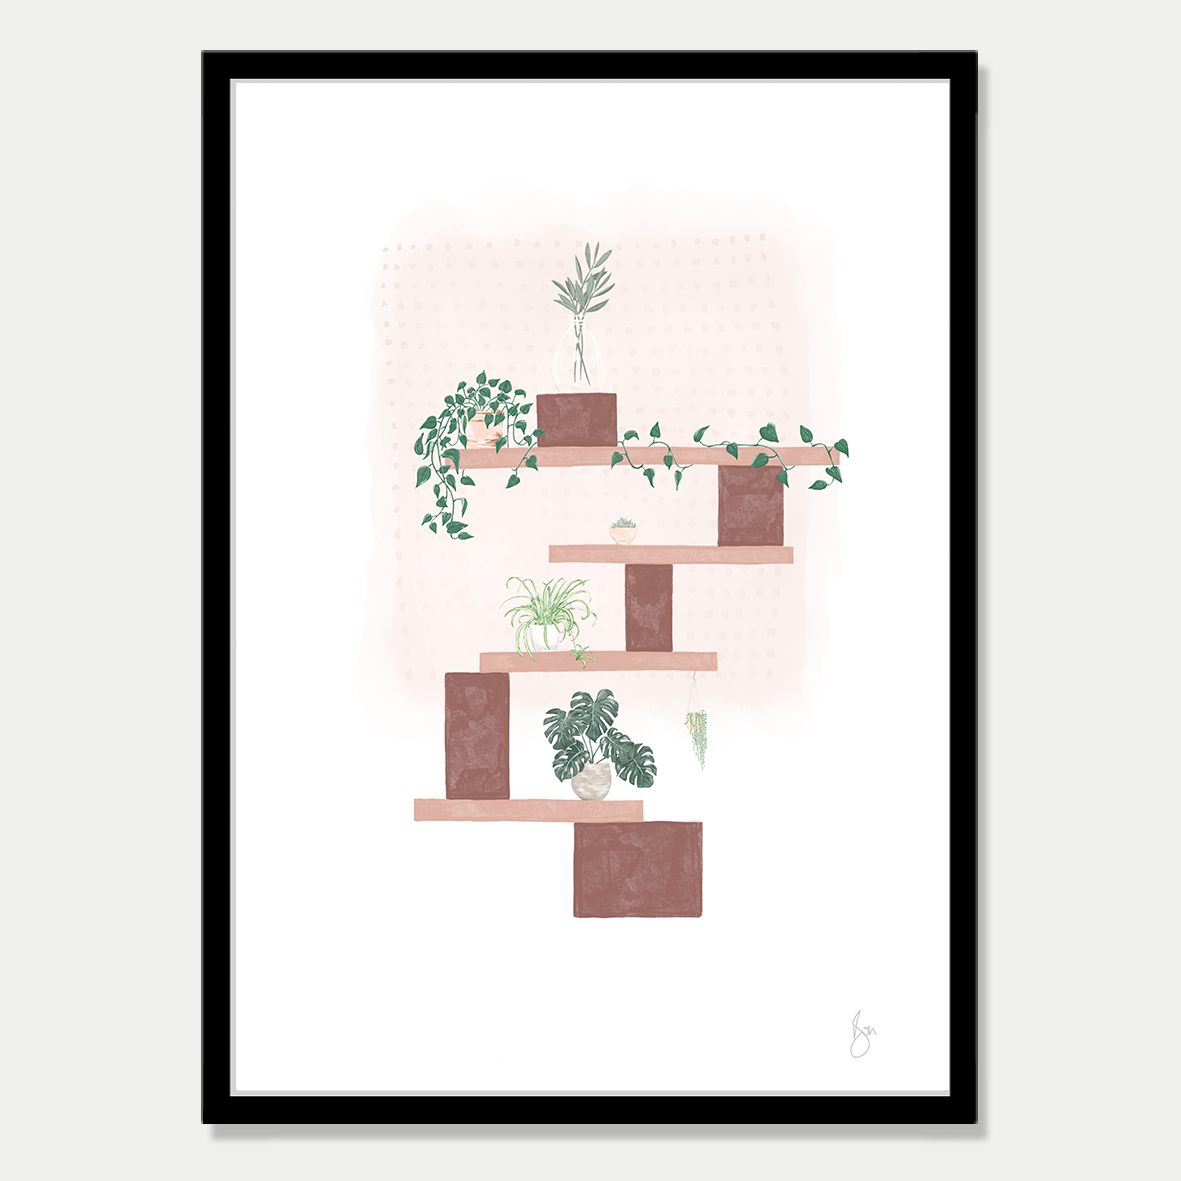 Art print of several blocks balancing with different plants at each level, in a soft autumn colour palette by Bon Jung. Printed in New Zealand by endemicworld and framed in black.